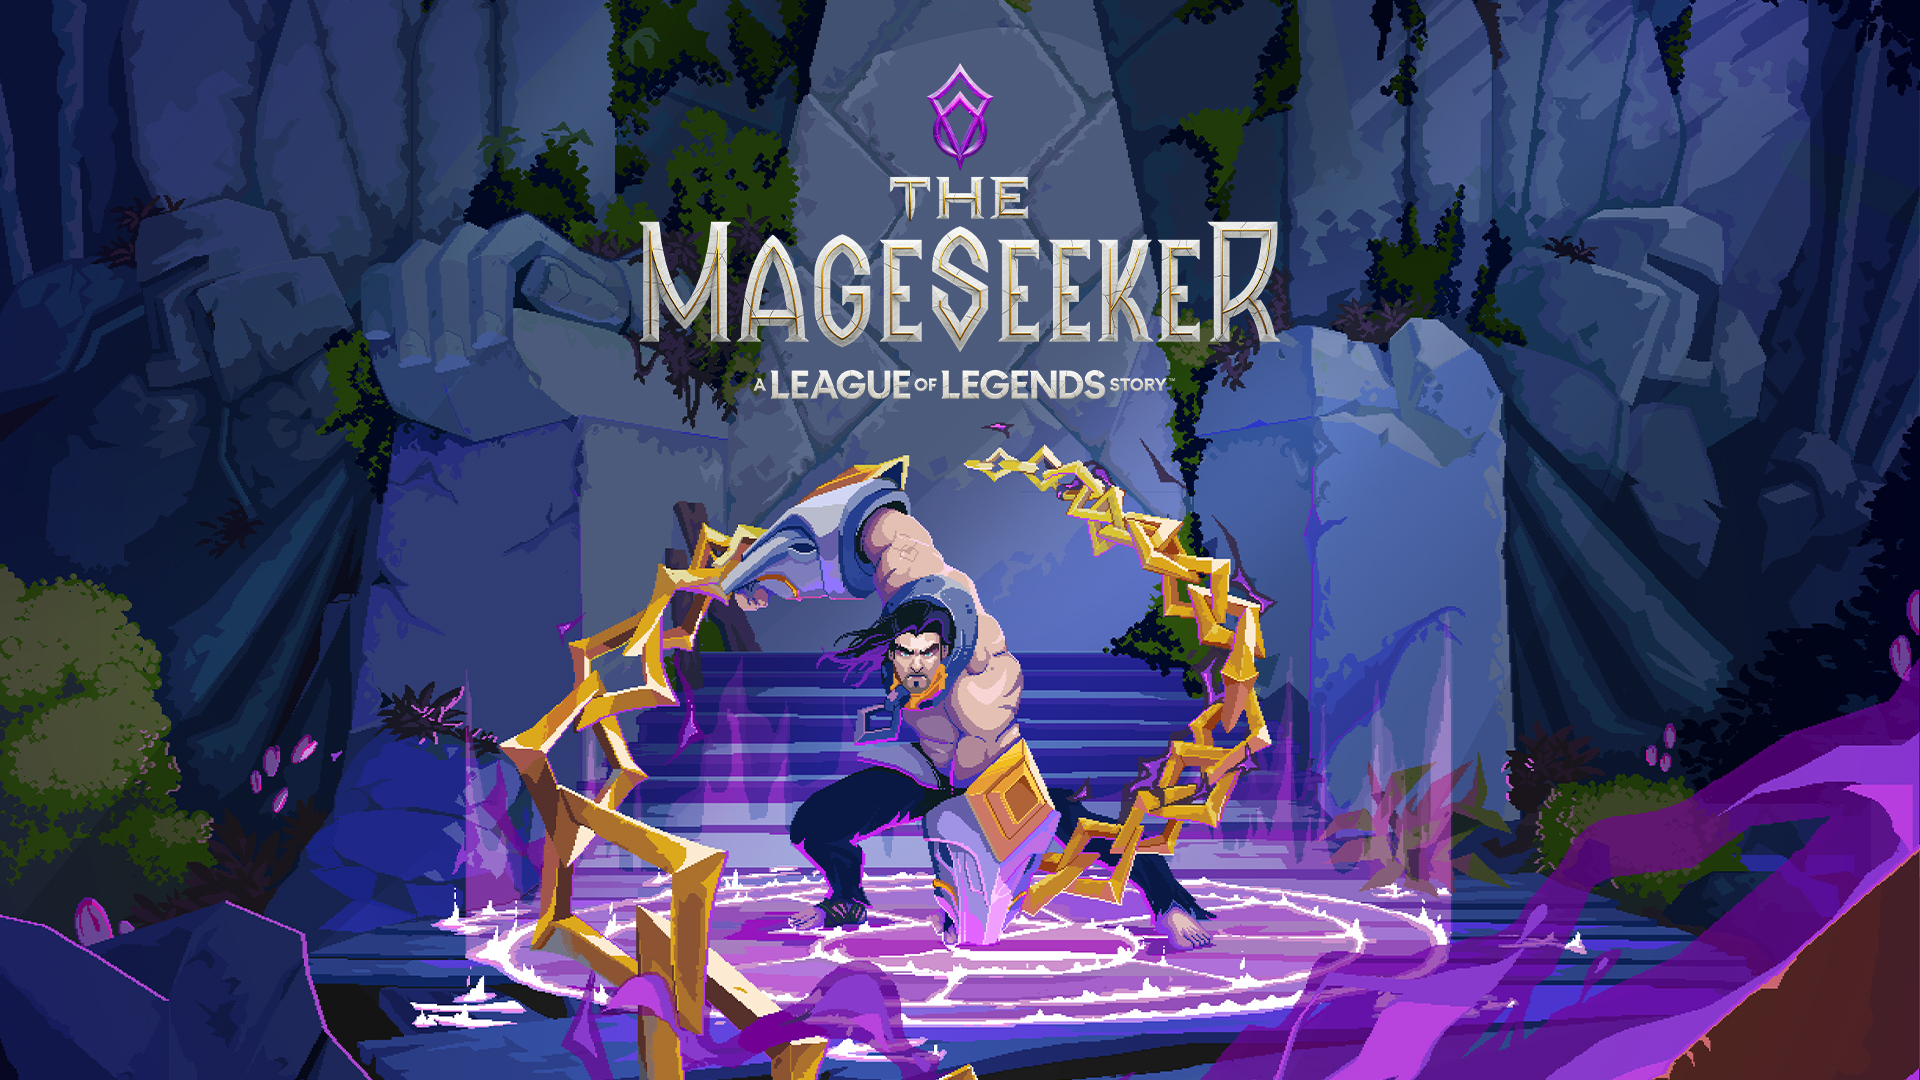 The Mageseeker: A League of Legends Story Preview - The ProNerd Report